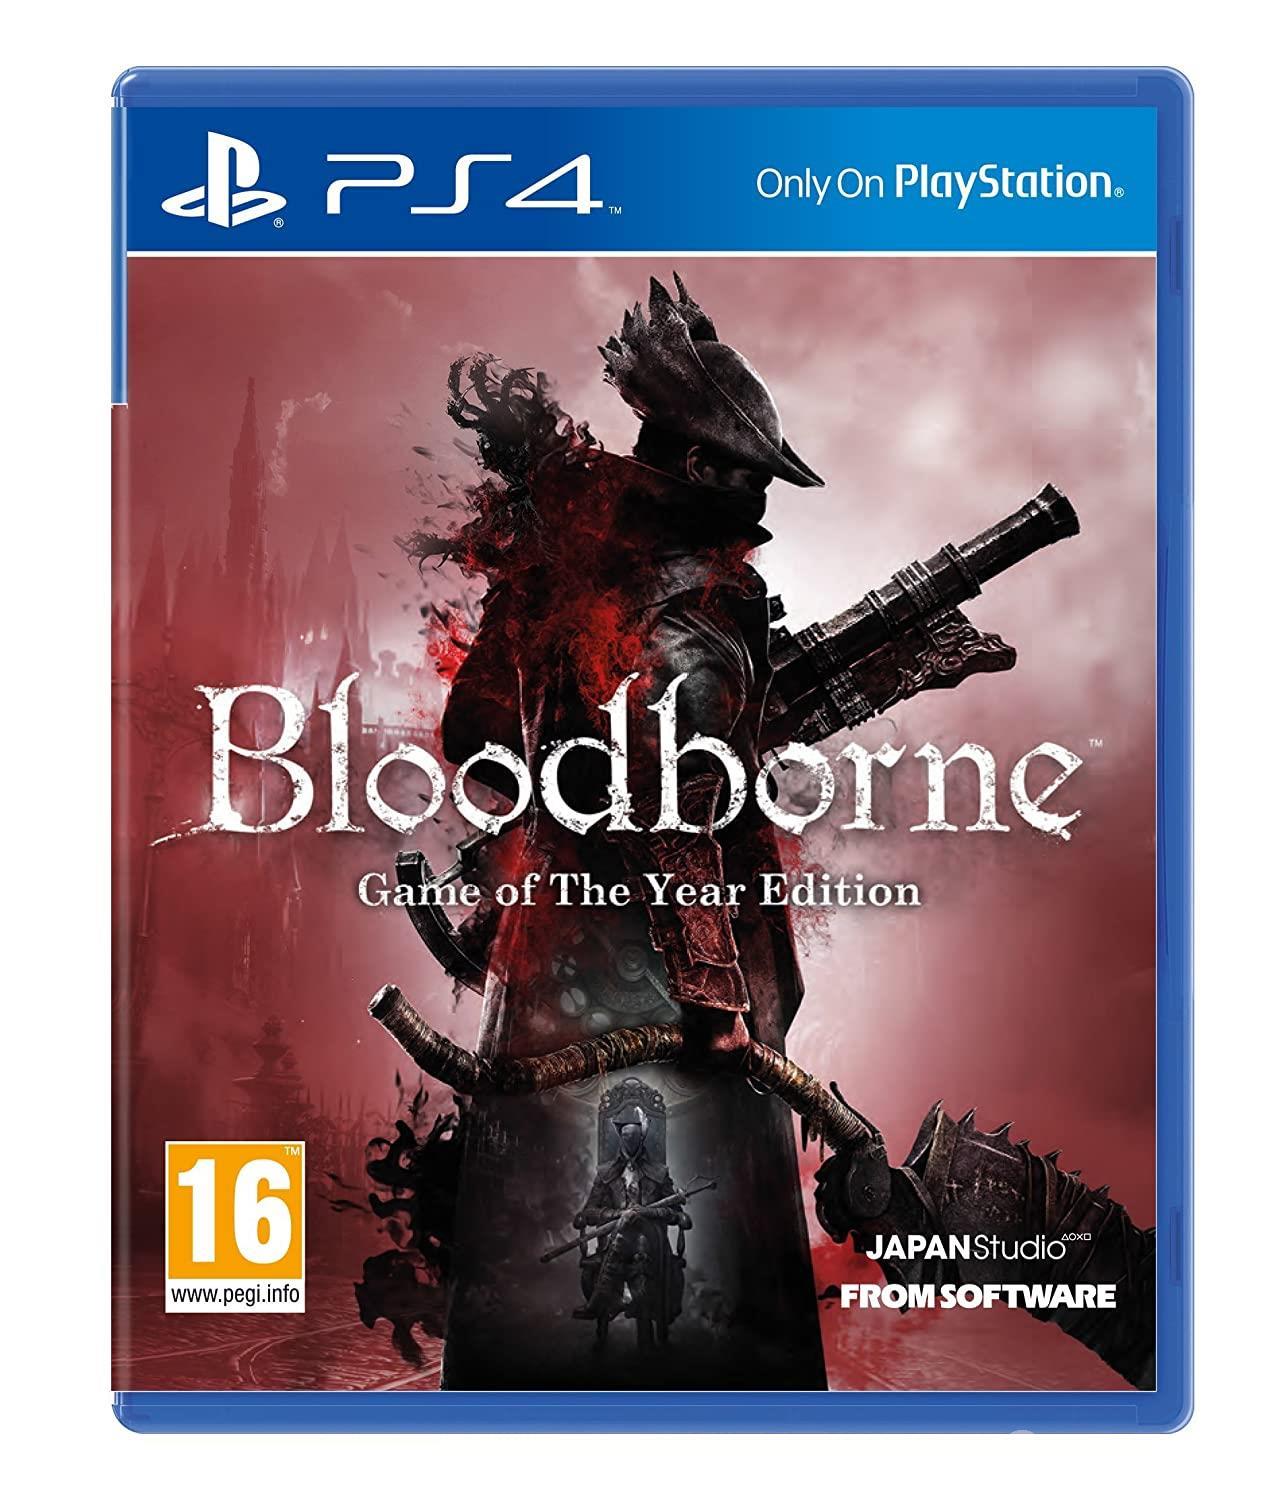 Bloodborne is so identical like Hollow Knight